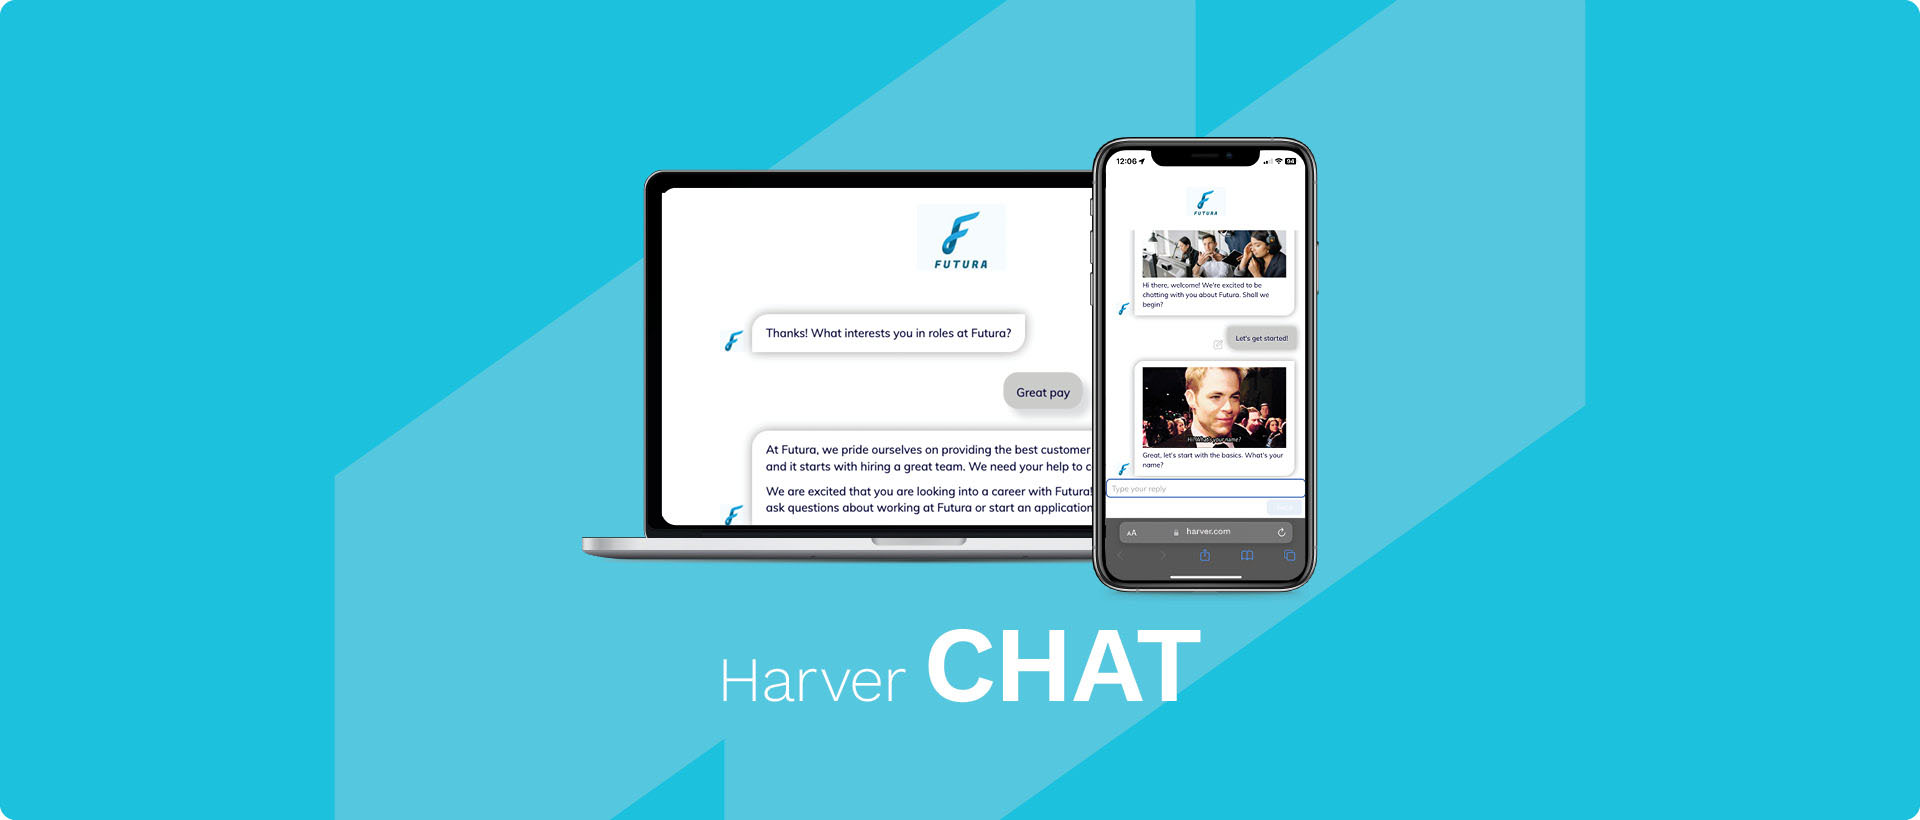 Conversational chatbot screenshots of Harver CHAT on laptop and mobile screens